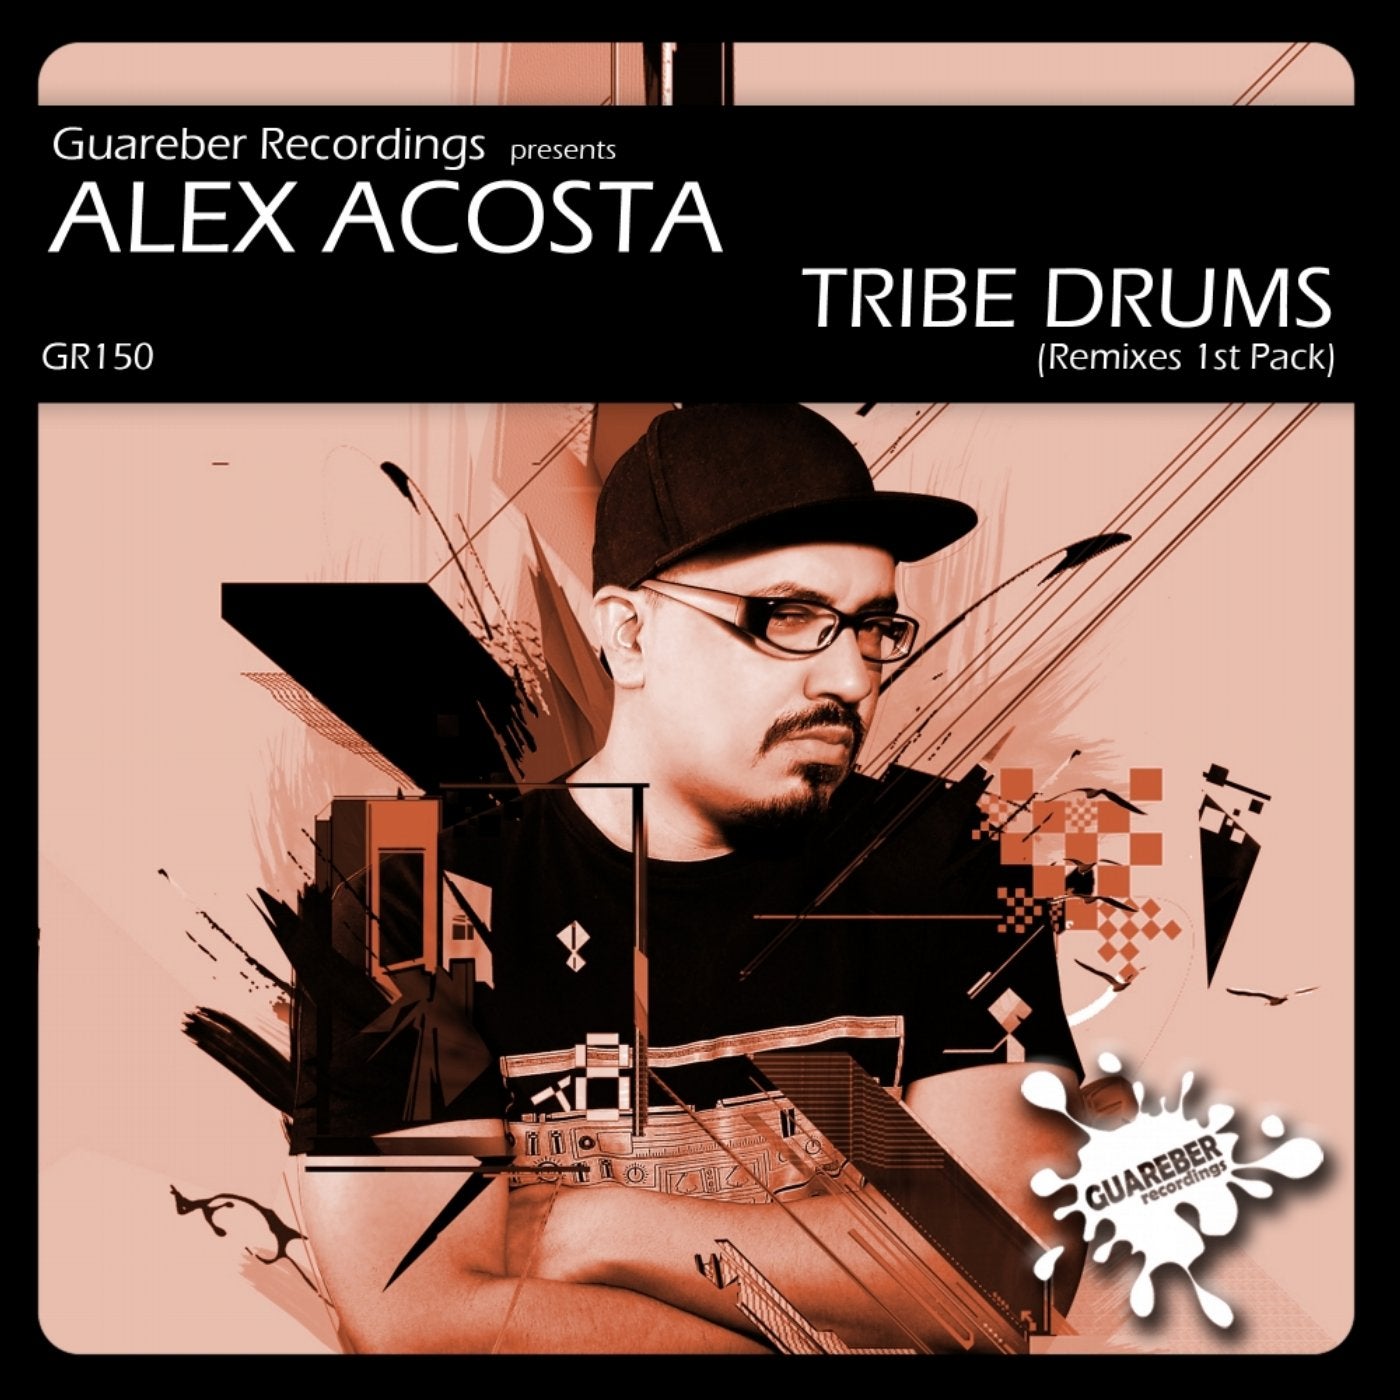 Tribe Drums Remixes 1st Pack